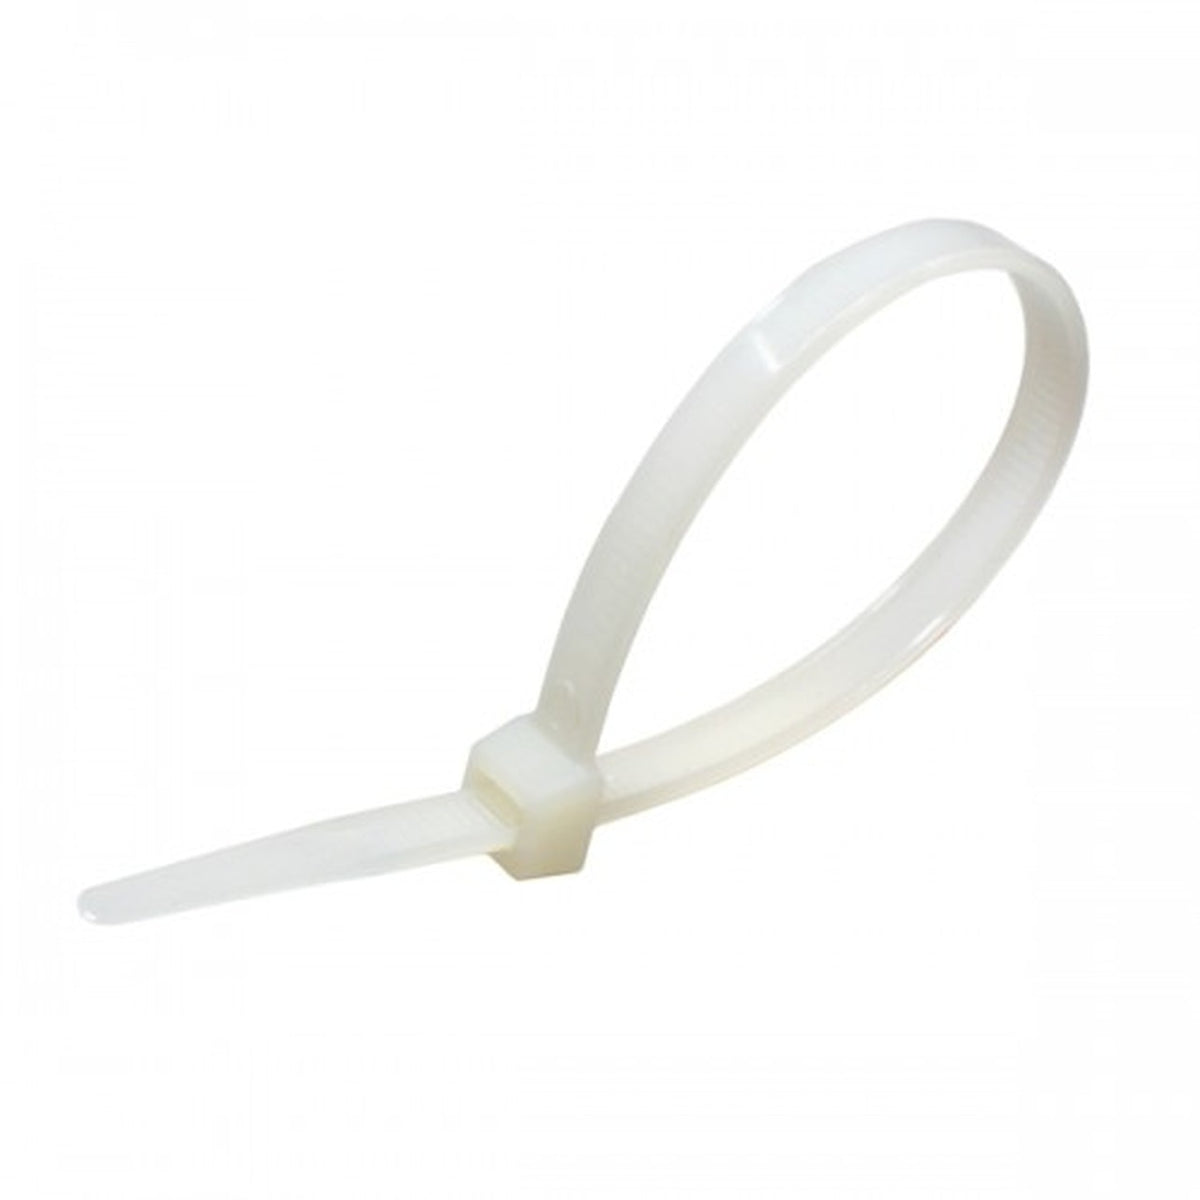 Cable Tie Nylon 300x4.8mm Natural (1000/pkt) - NCT-300/48N/1K